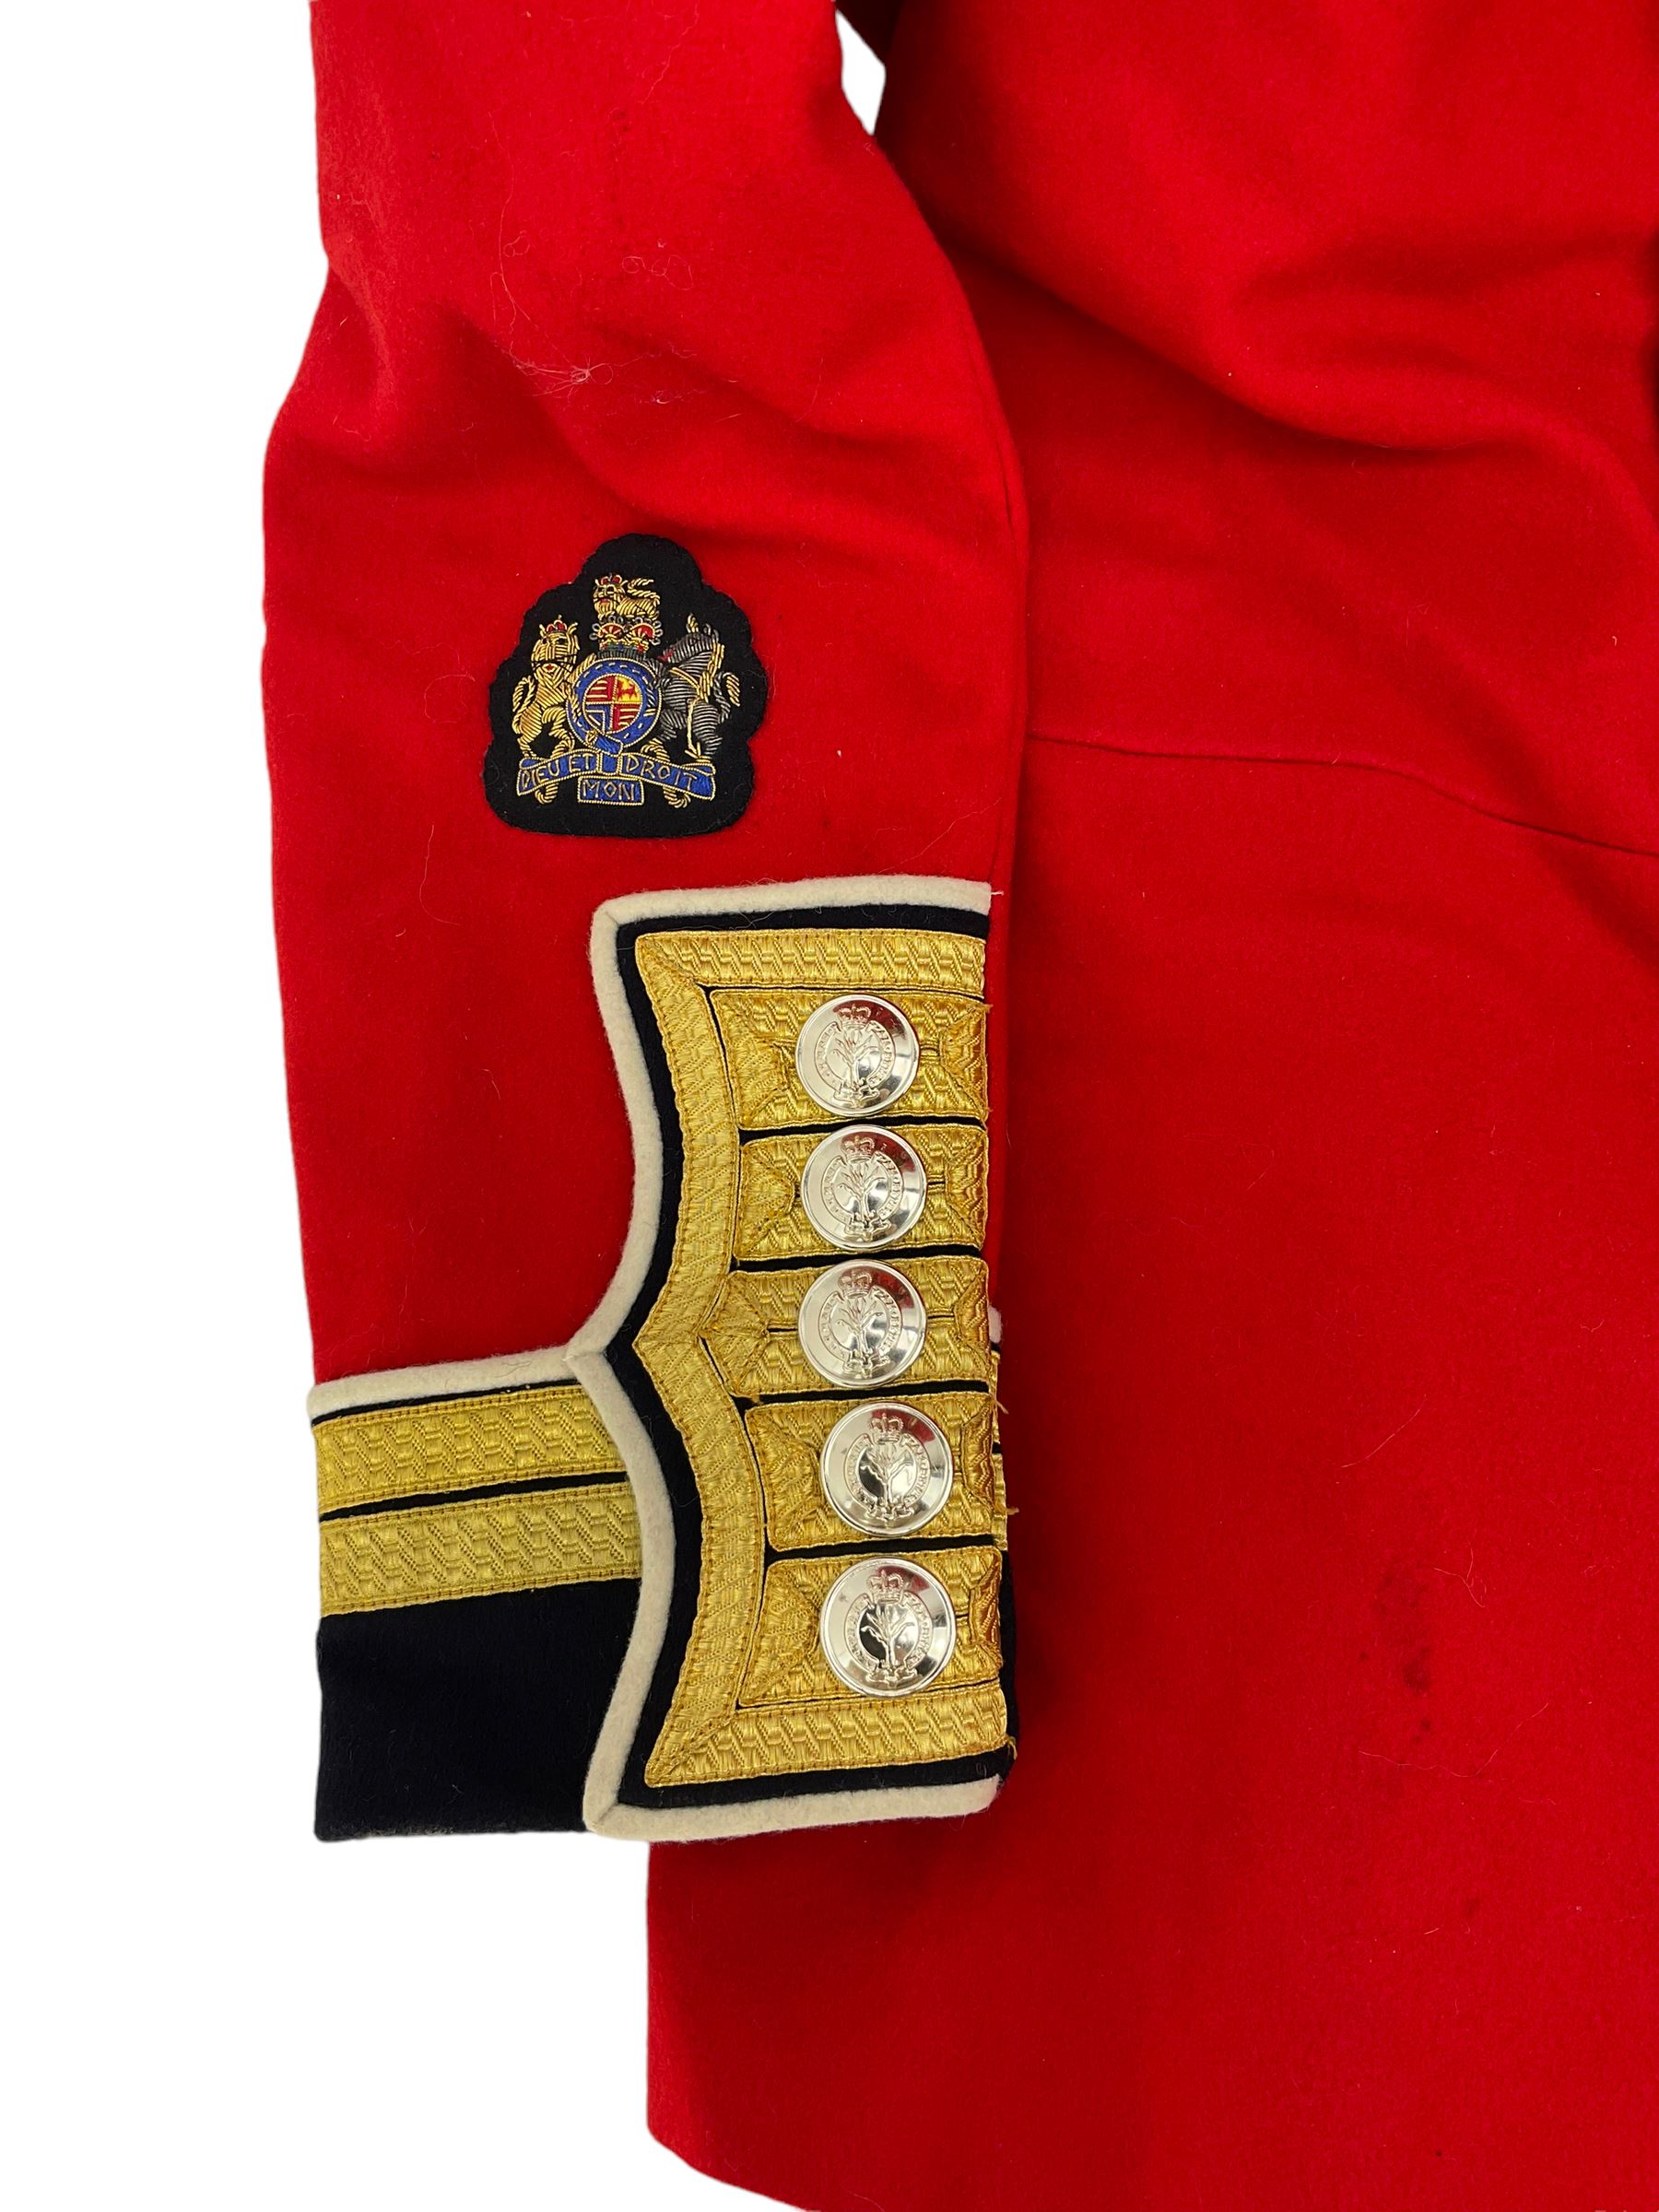 Welsh Guards dress tunic - Image 4 of 4